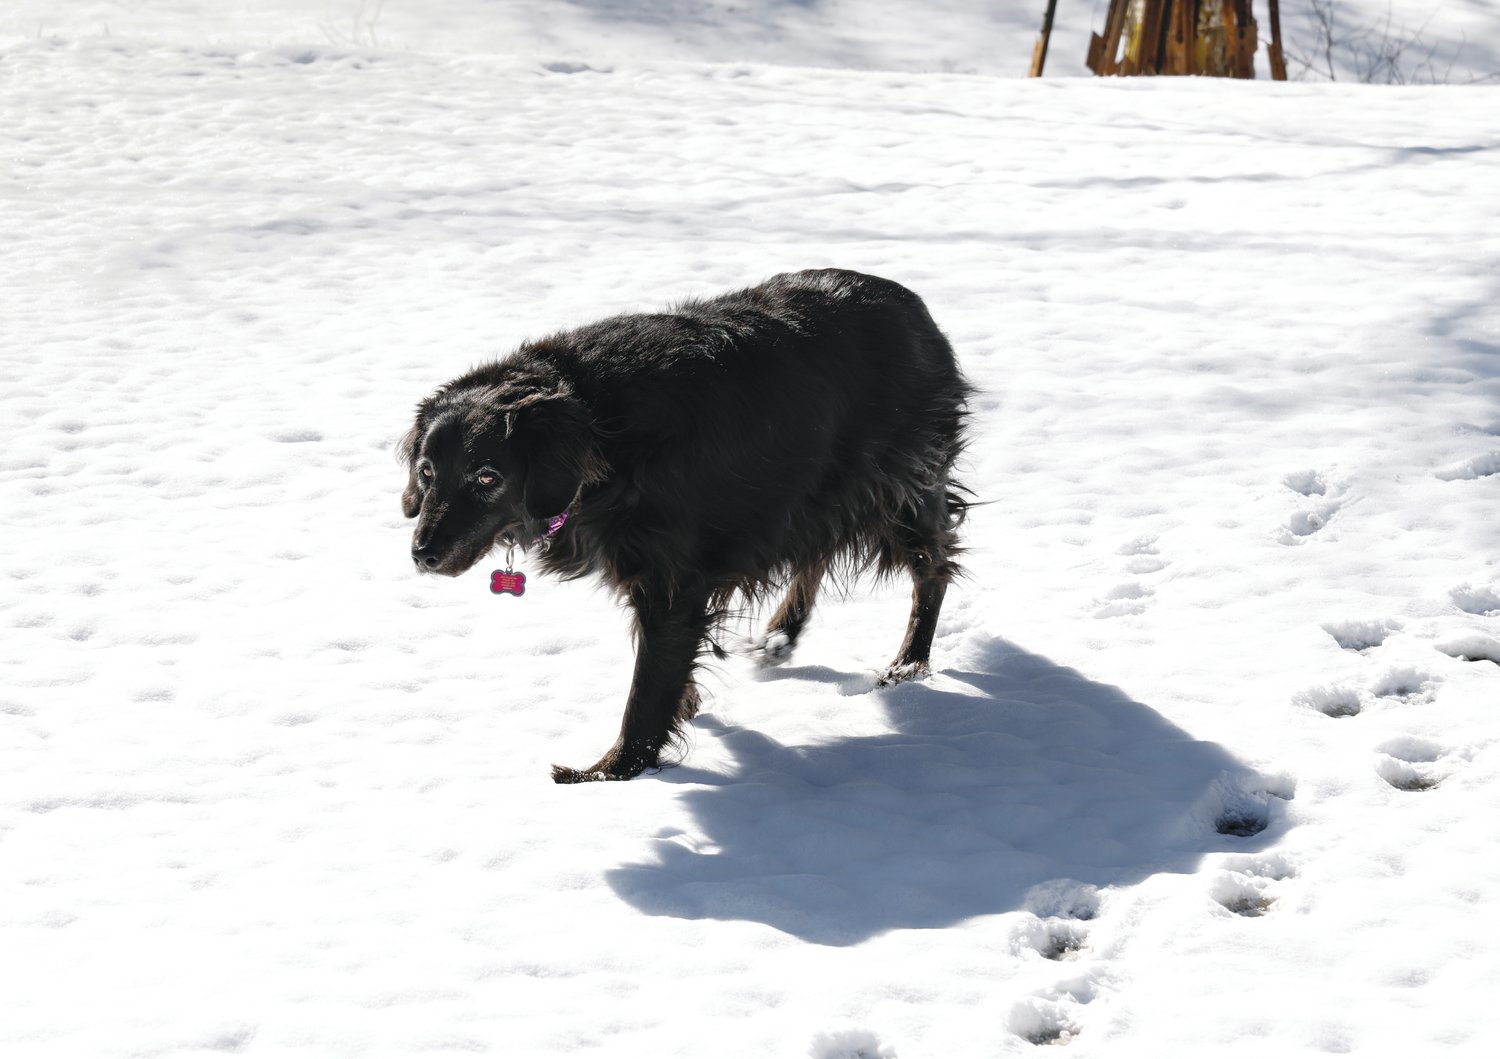 Sassy the dog trudges through last weekend's snow outside of staff photographer Simon Barbre's Chatham County home.